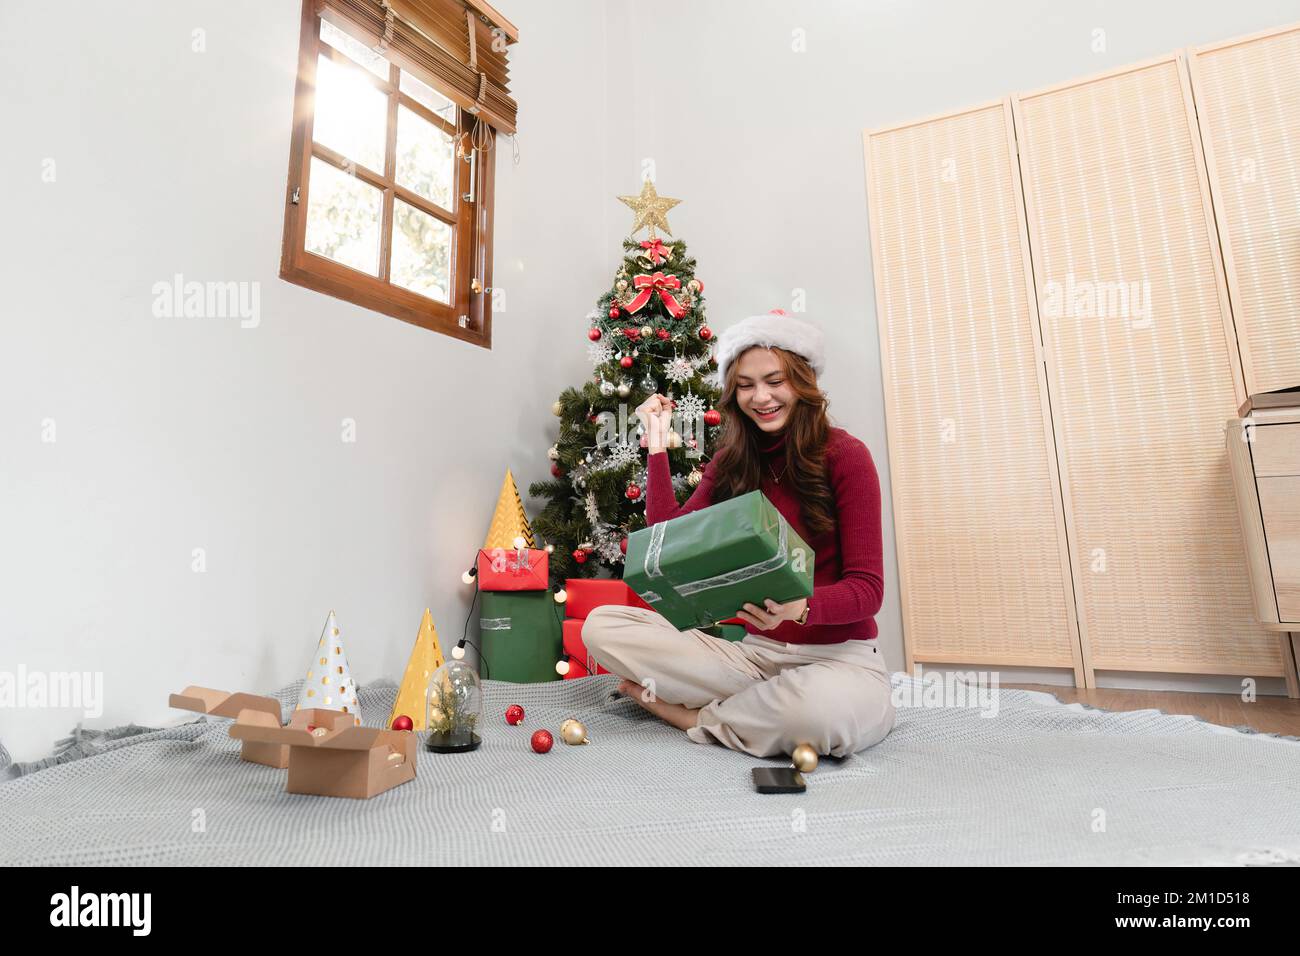 Happy woman sitting against Christmas tree background. Cheerful lady surprised of gift box. Marry Christmas and Happy Holidays Stock Photo